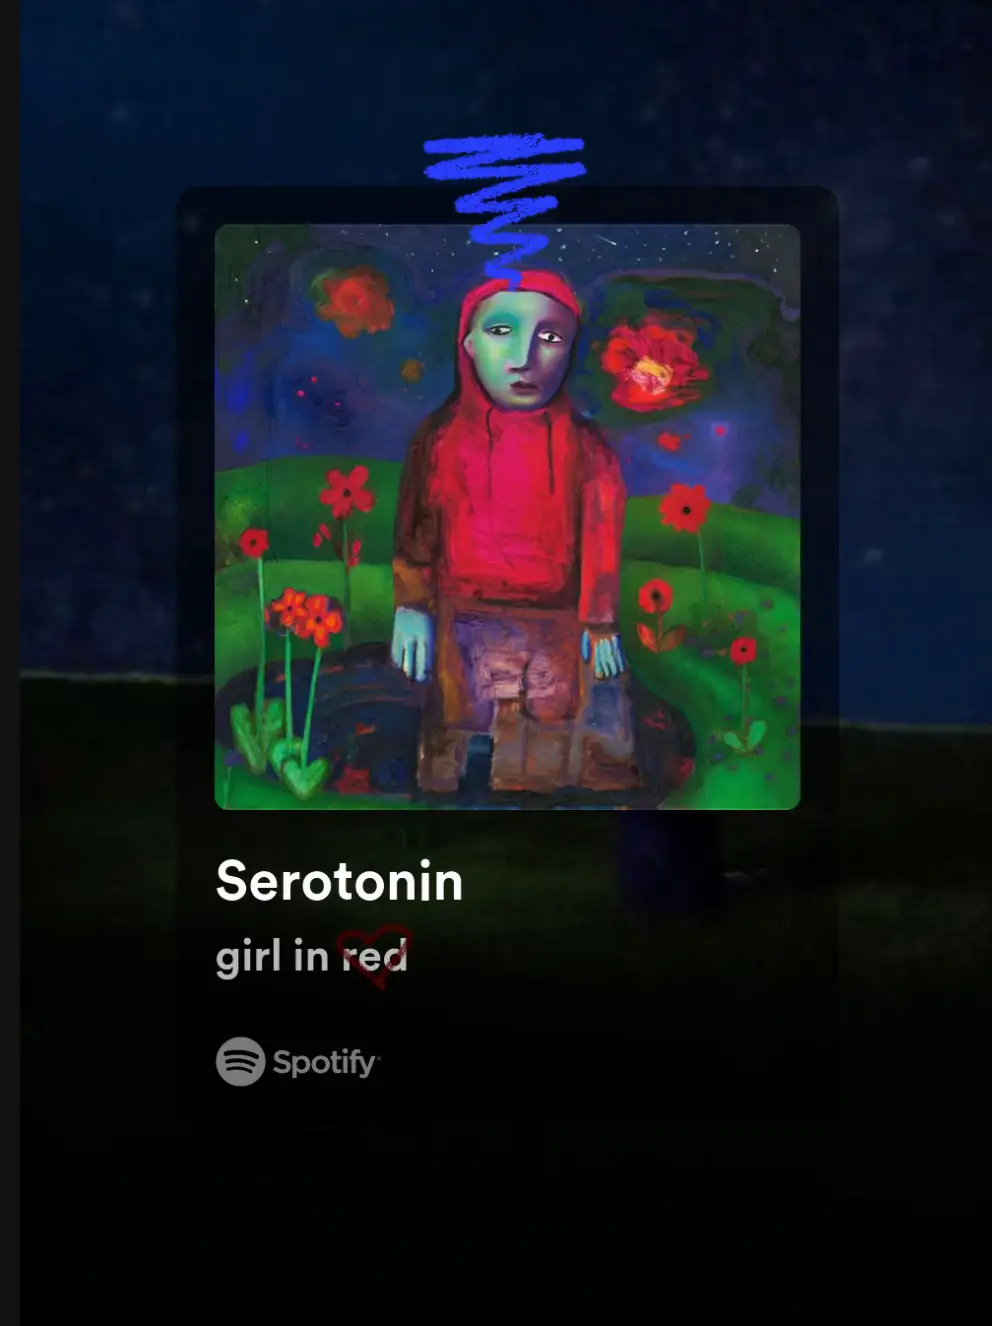  A Spotify ad for a song called "Serotonin girl in red".